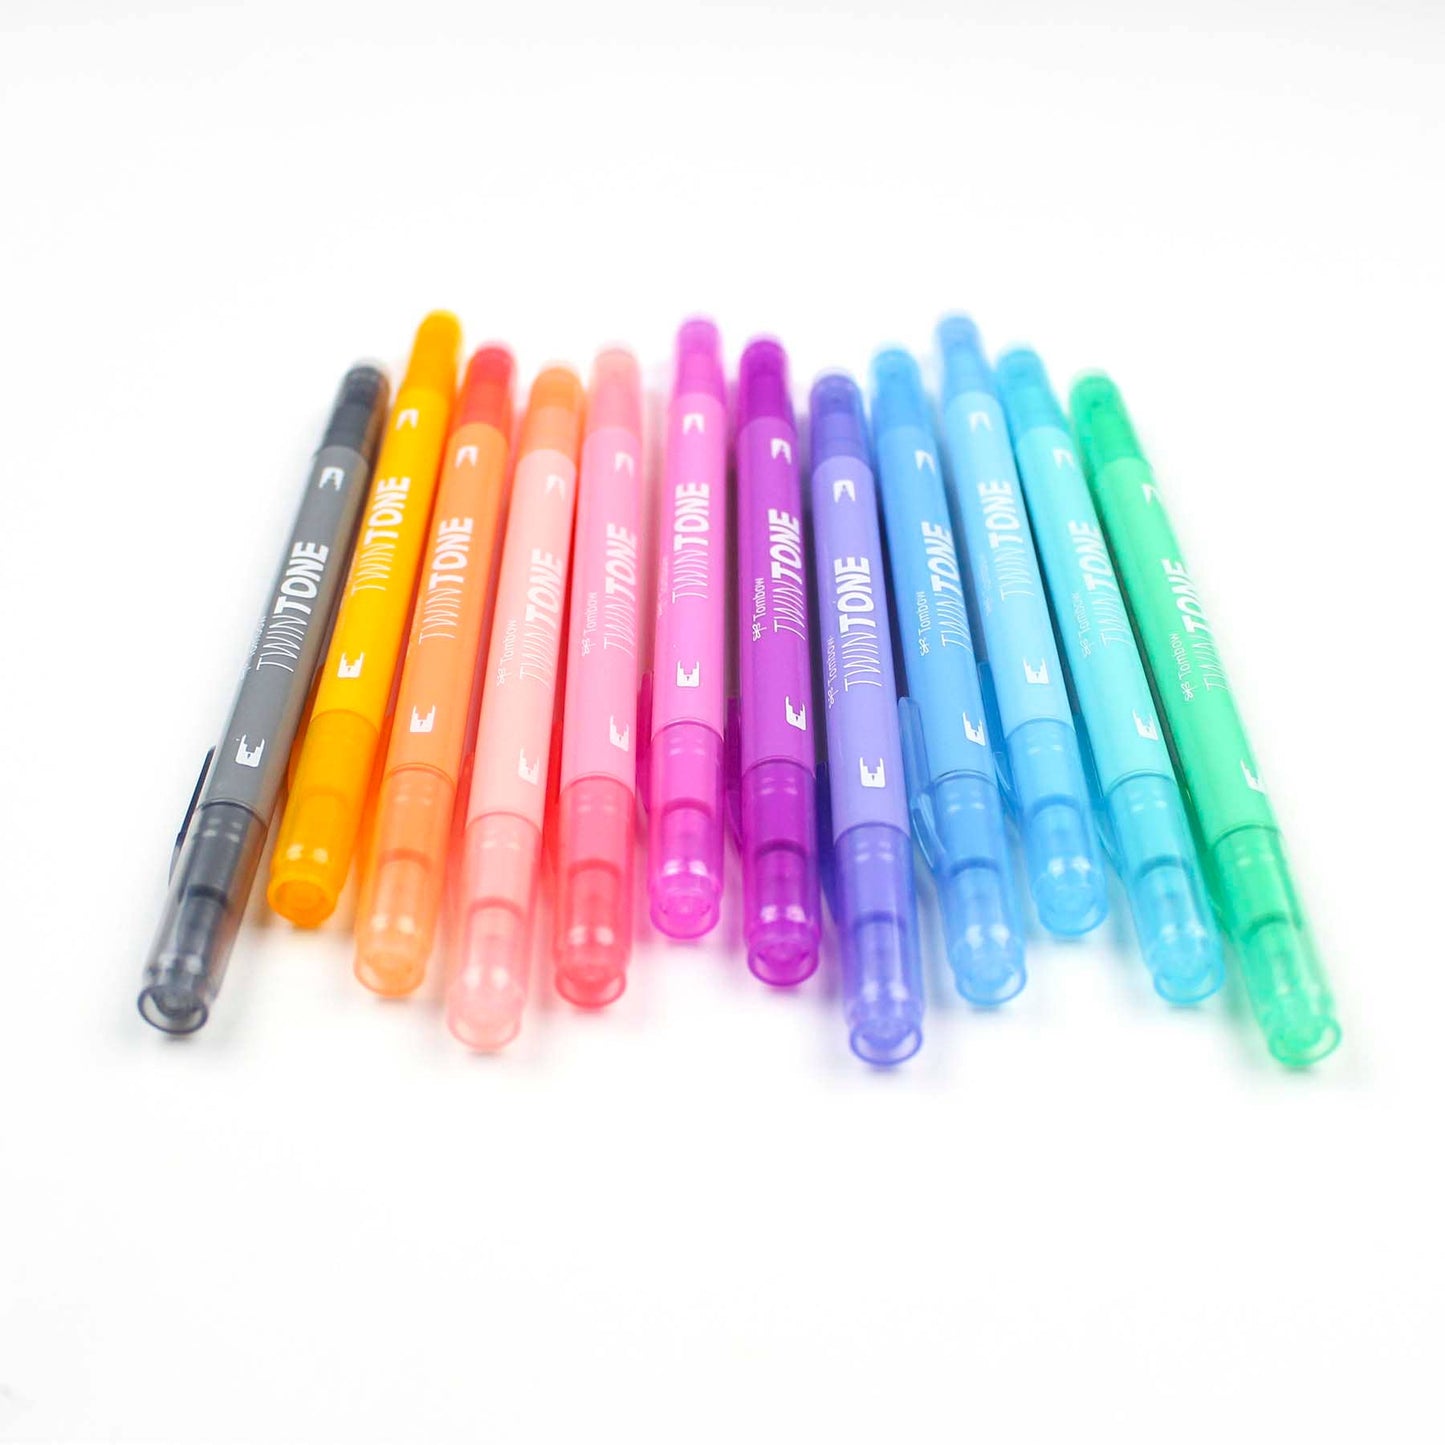 Tombow - TwinTone Marker Set: Pastel - 12-Pack